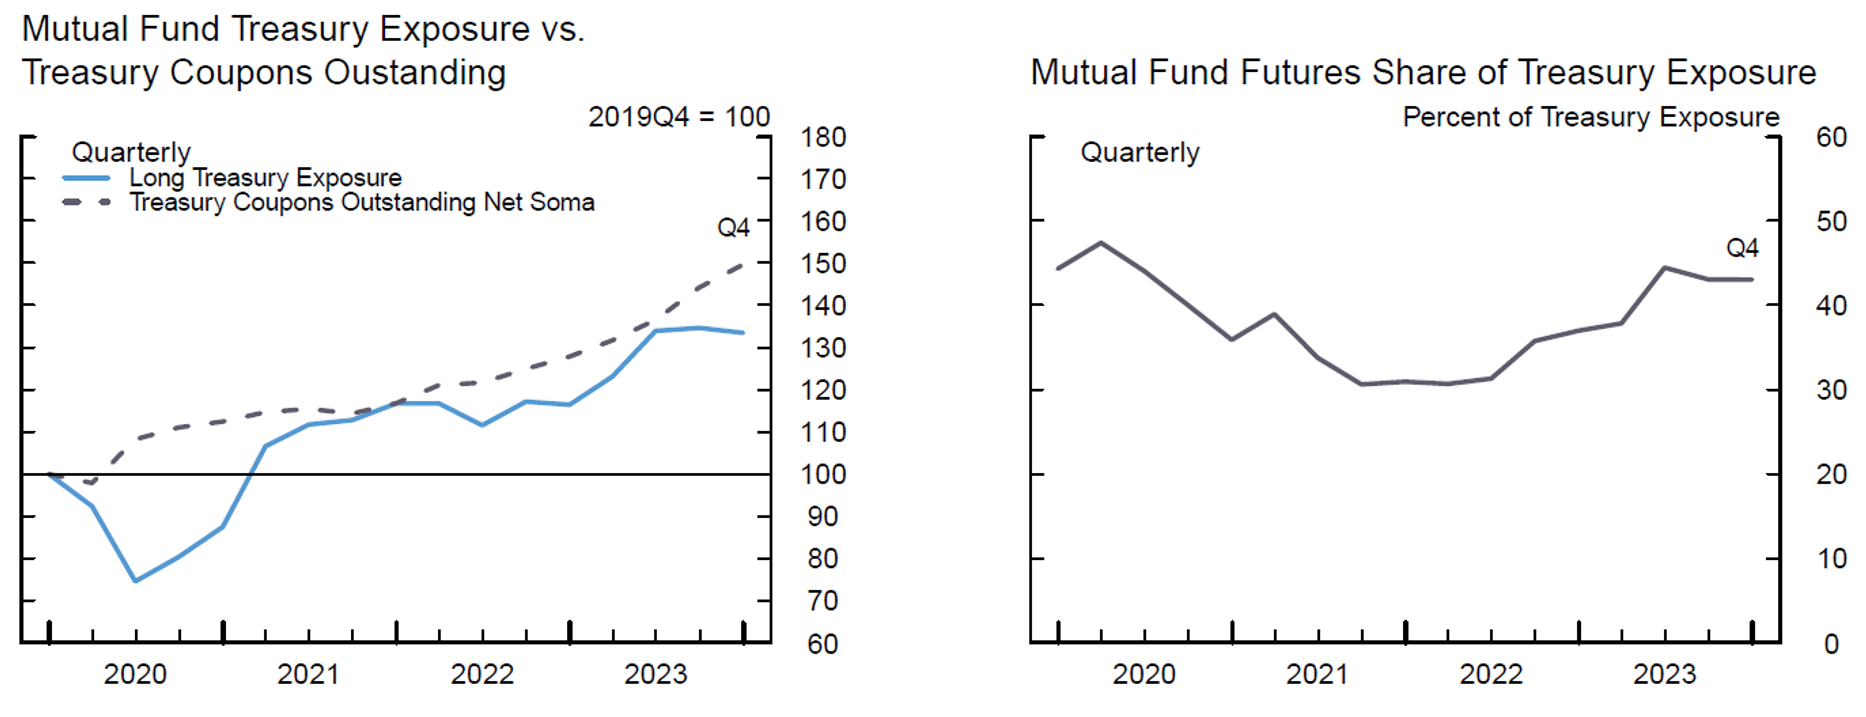 Figure 4. Mutual Fund Treasury Exposure and Futures Share. See accessible link for data.